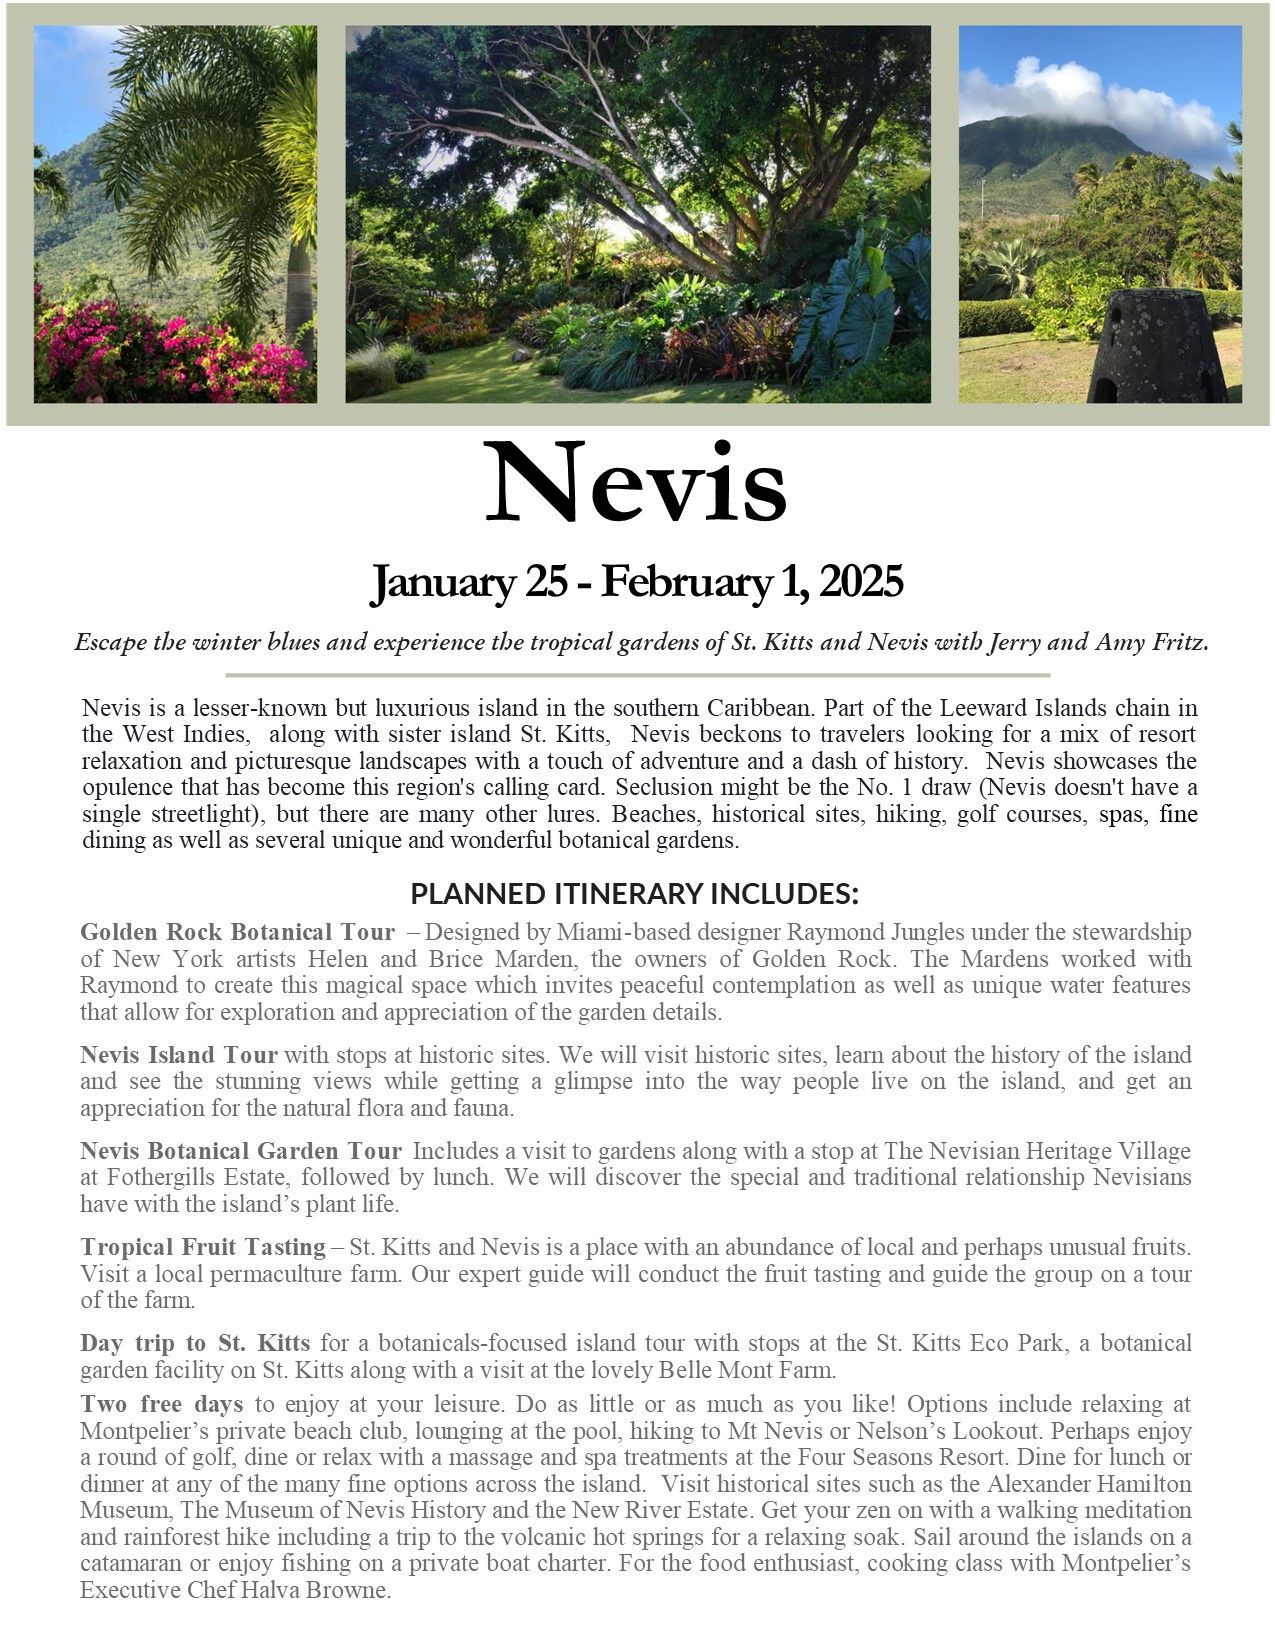 A newspaper article about nevis on january 28 - february 1 , 2015.